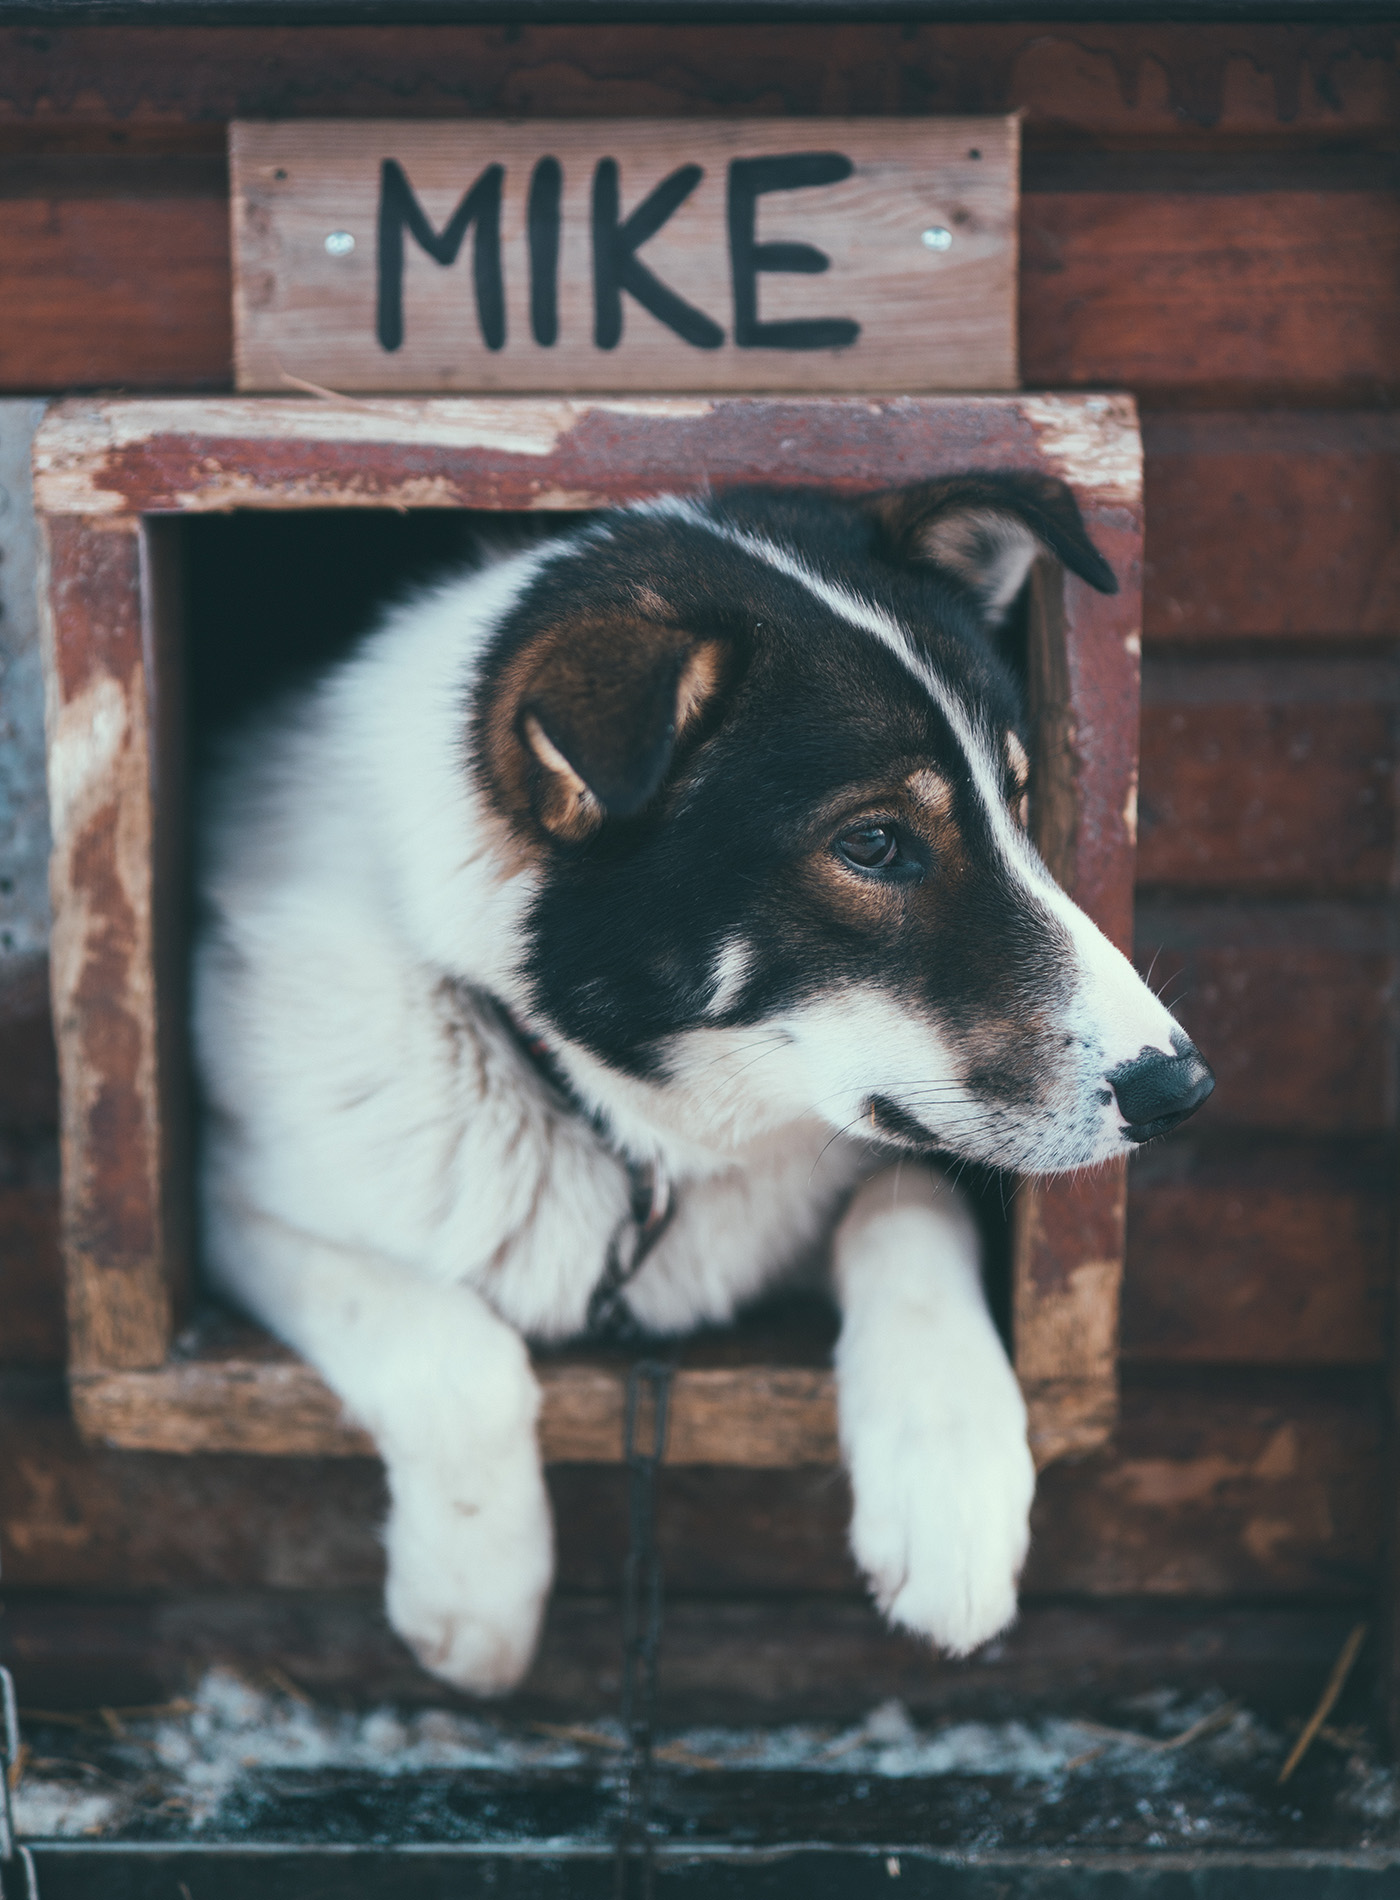 Dusty, brown and white alaskan husky looking out of wooden dog house